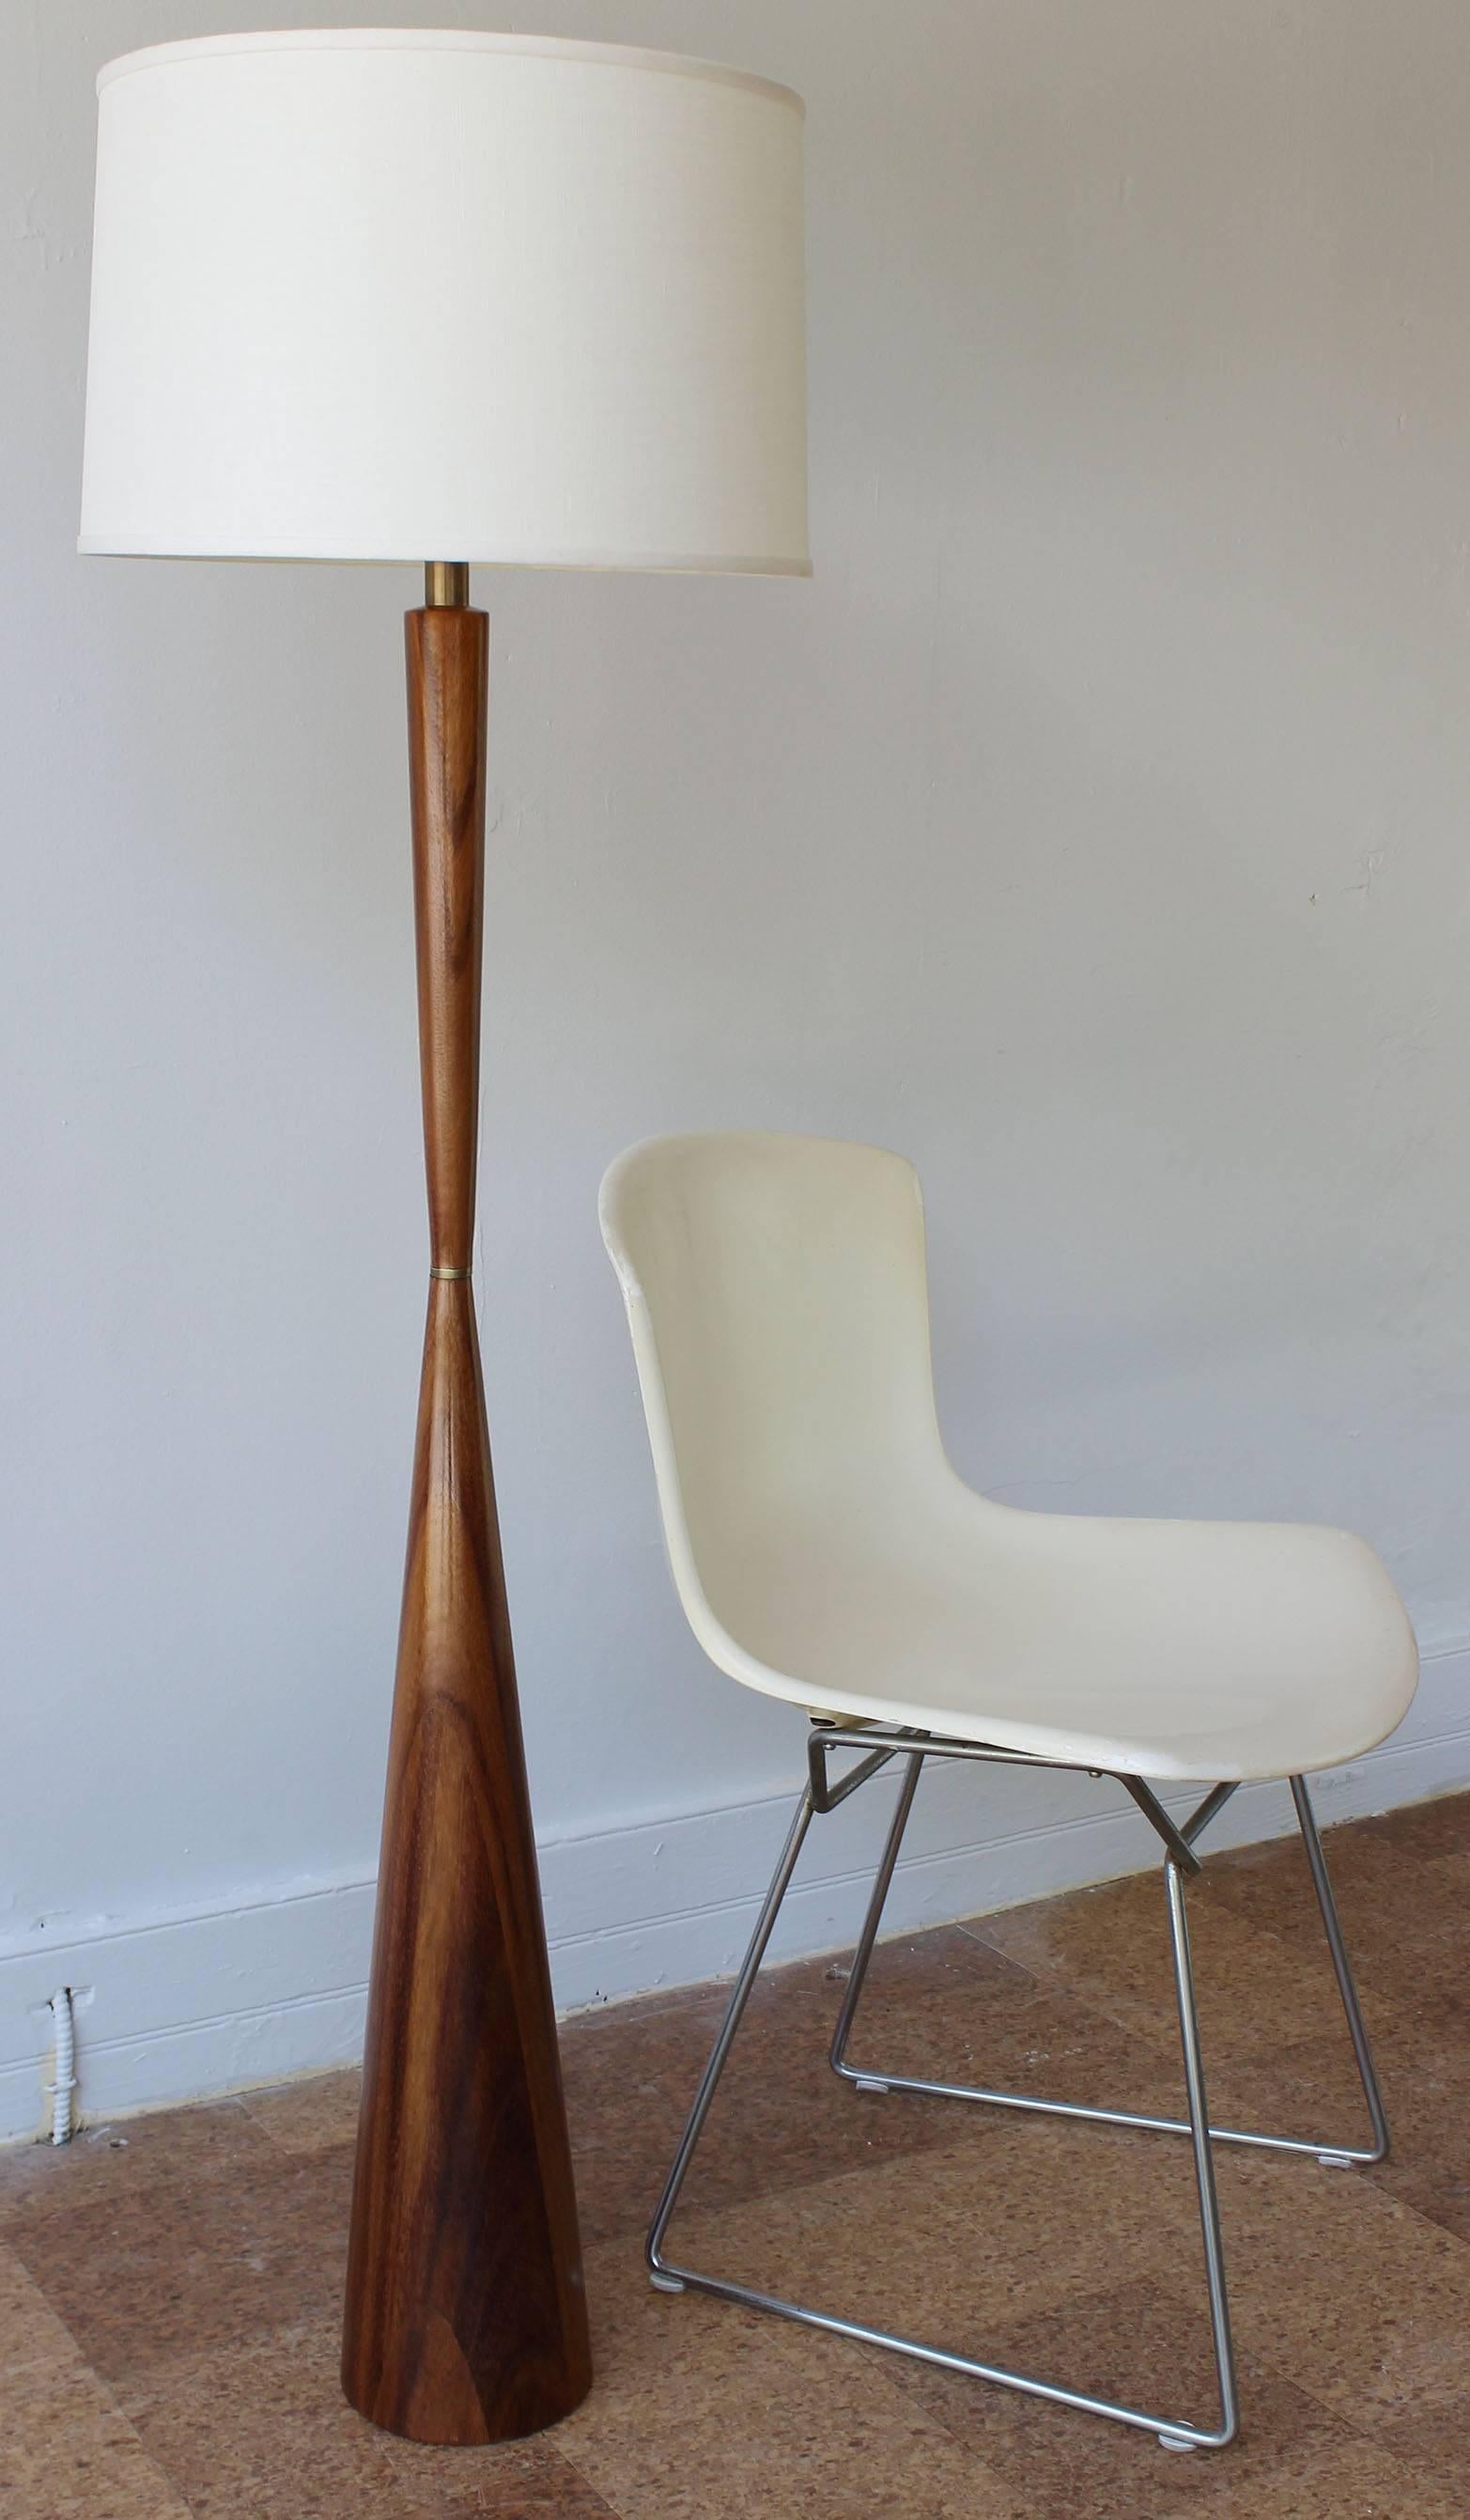 A stunning turned solid walnut floor lamp with brass details.

Height is to socket. Shade for photo only.

New wiring.